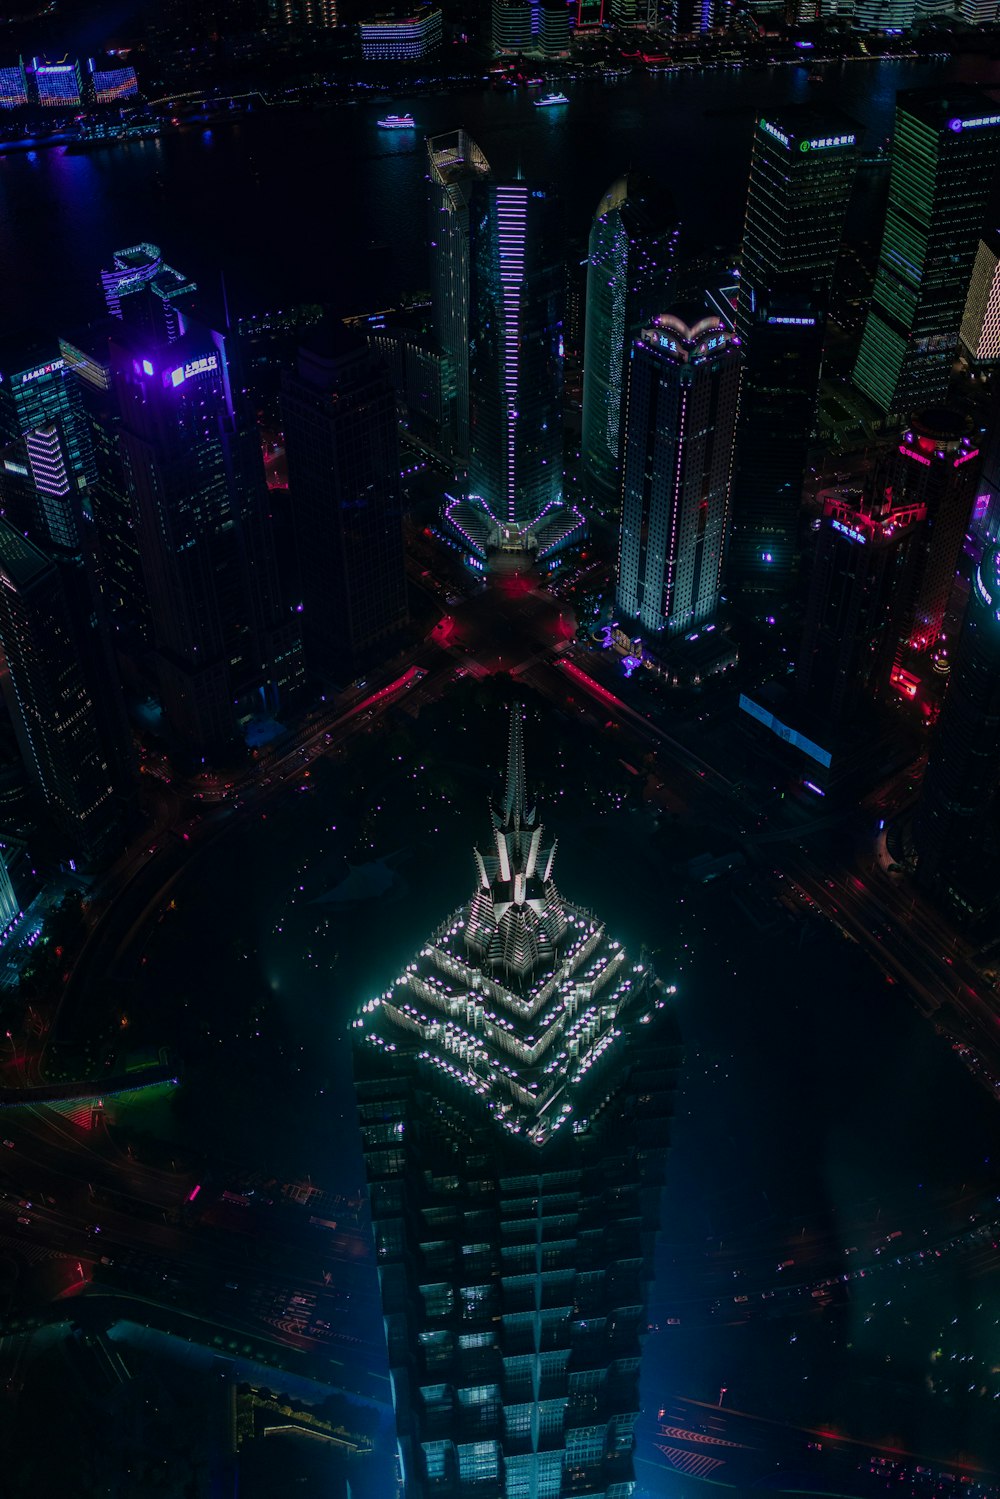 aerial city building scenery during nighttime